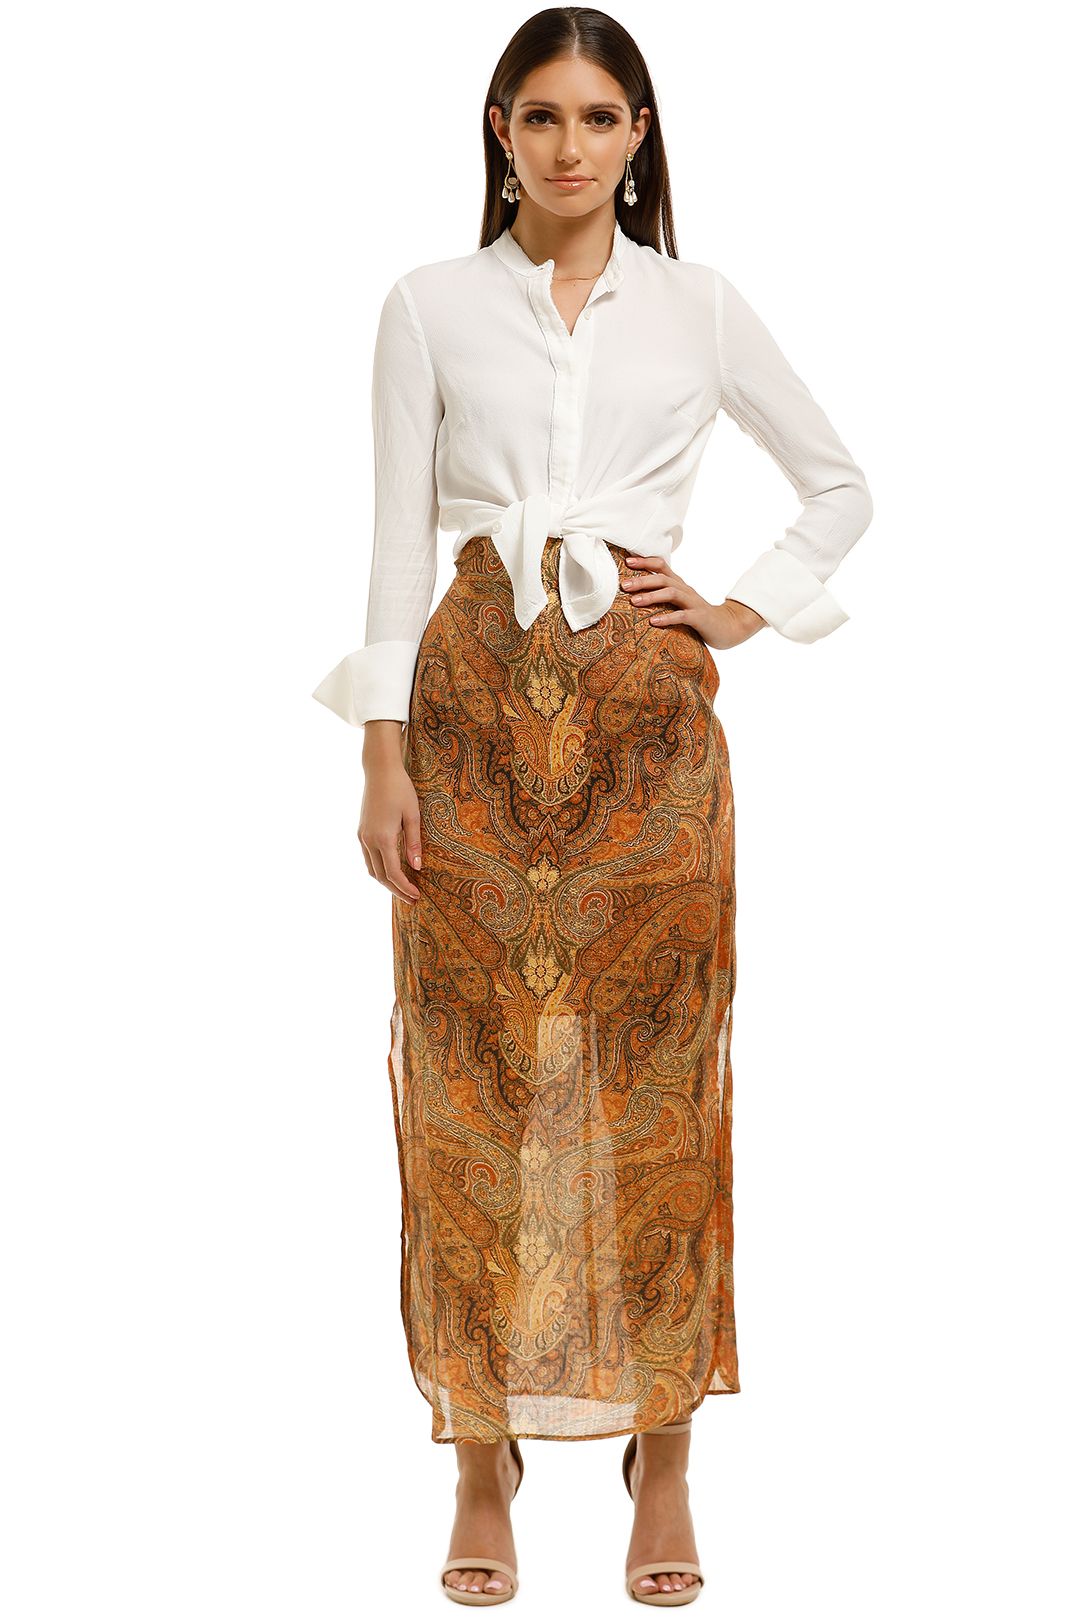 Ministry of Style - Rhapsody Skirt - Brown - Front